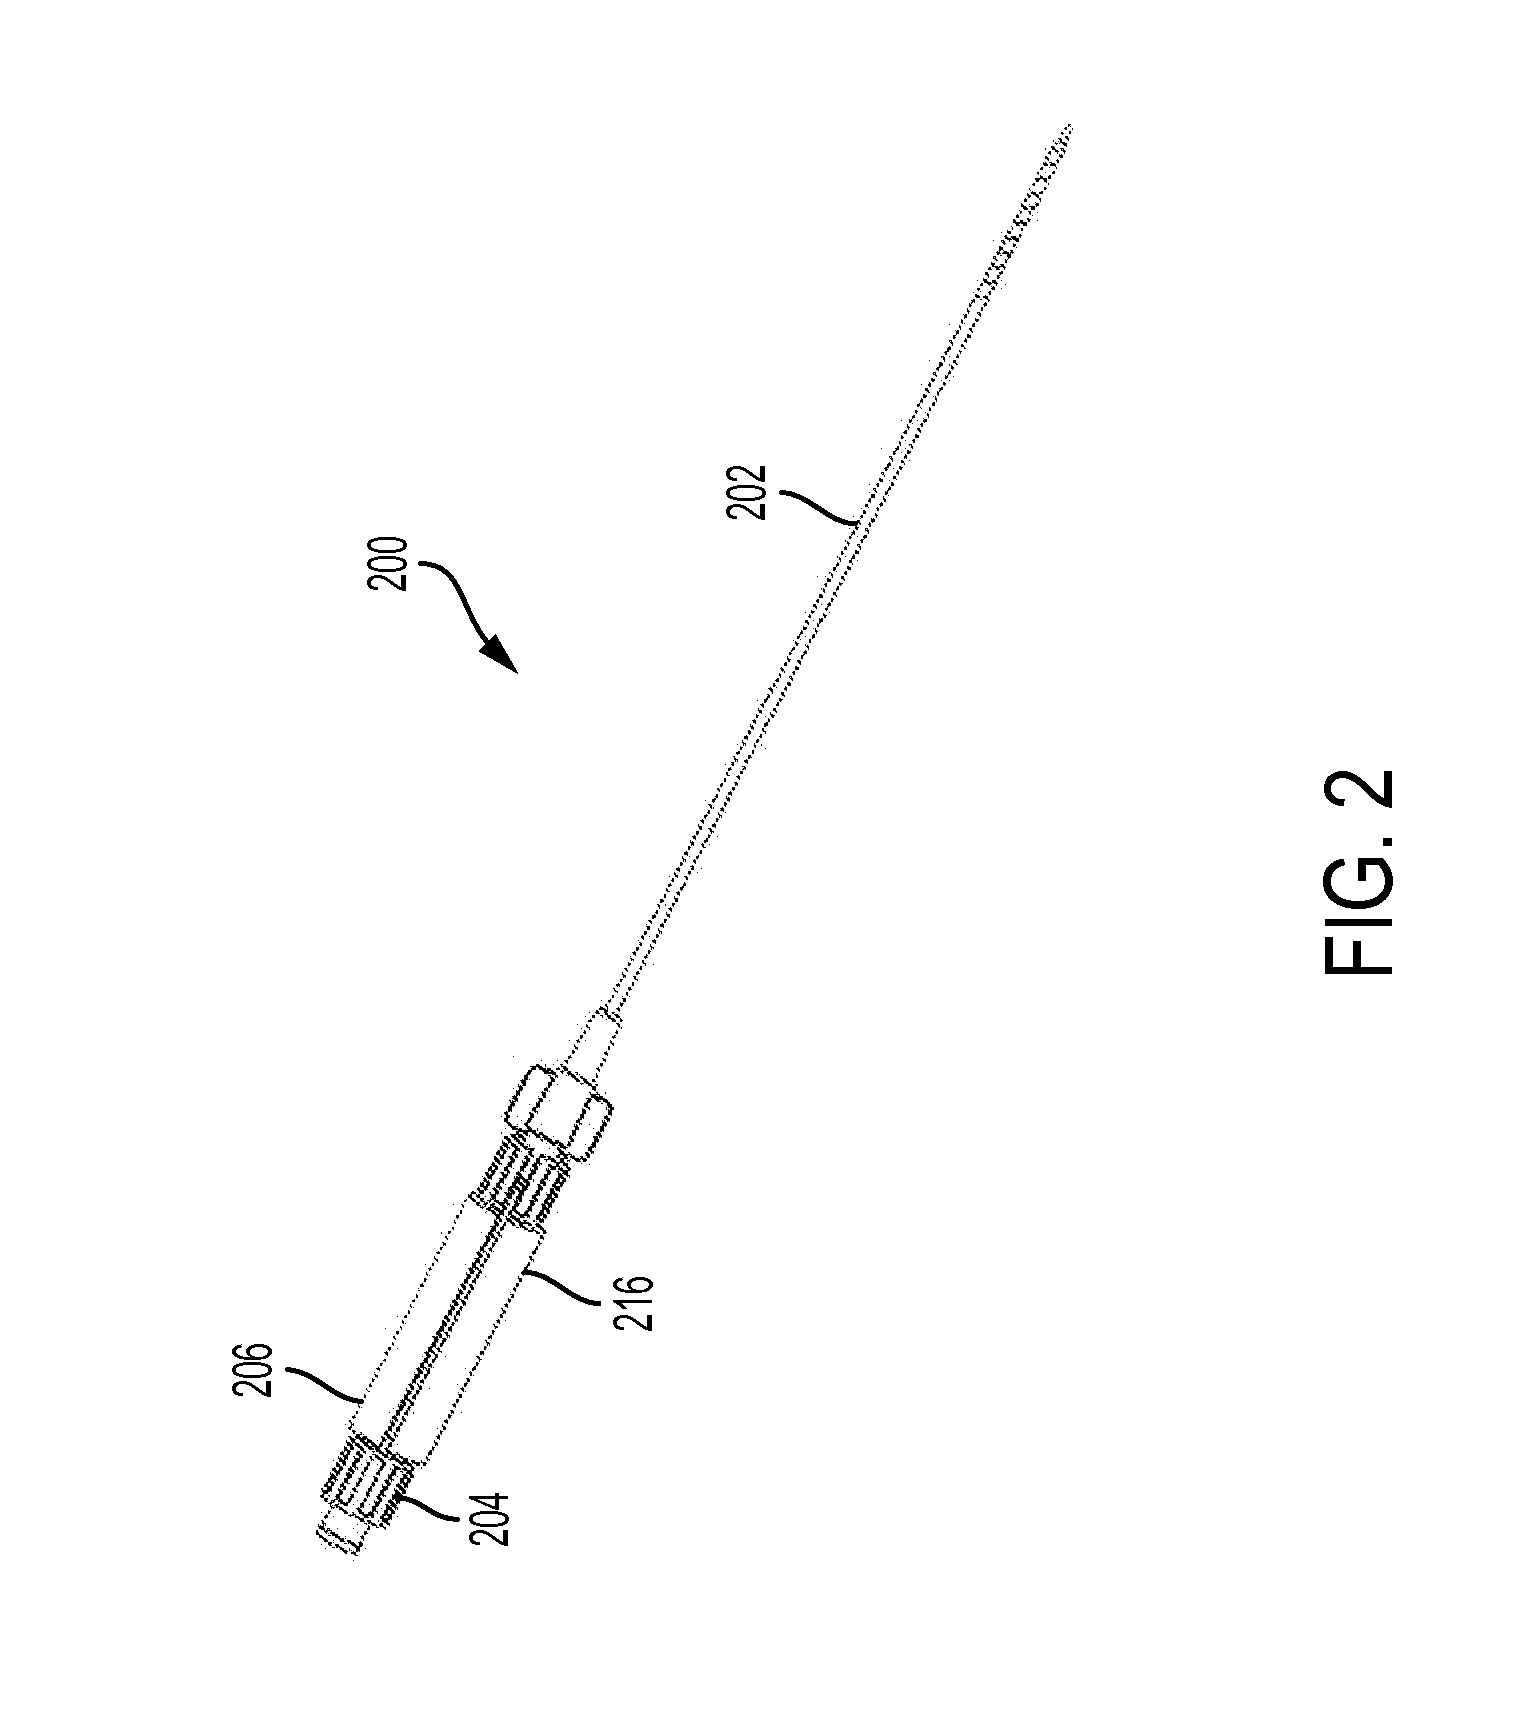 Pericardial access devices and methods